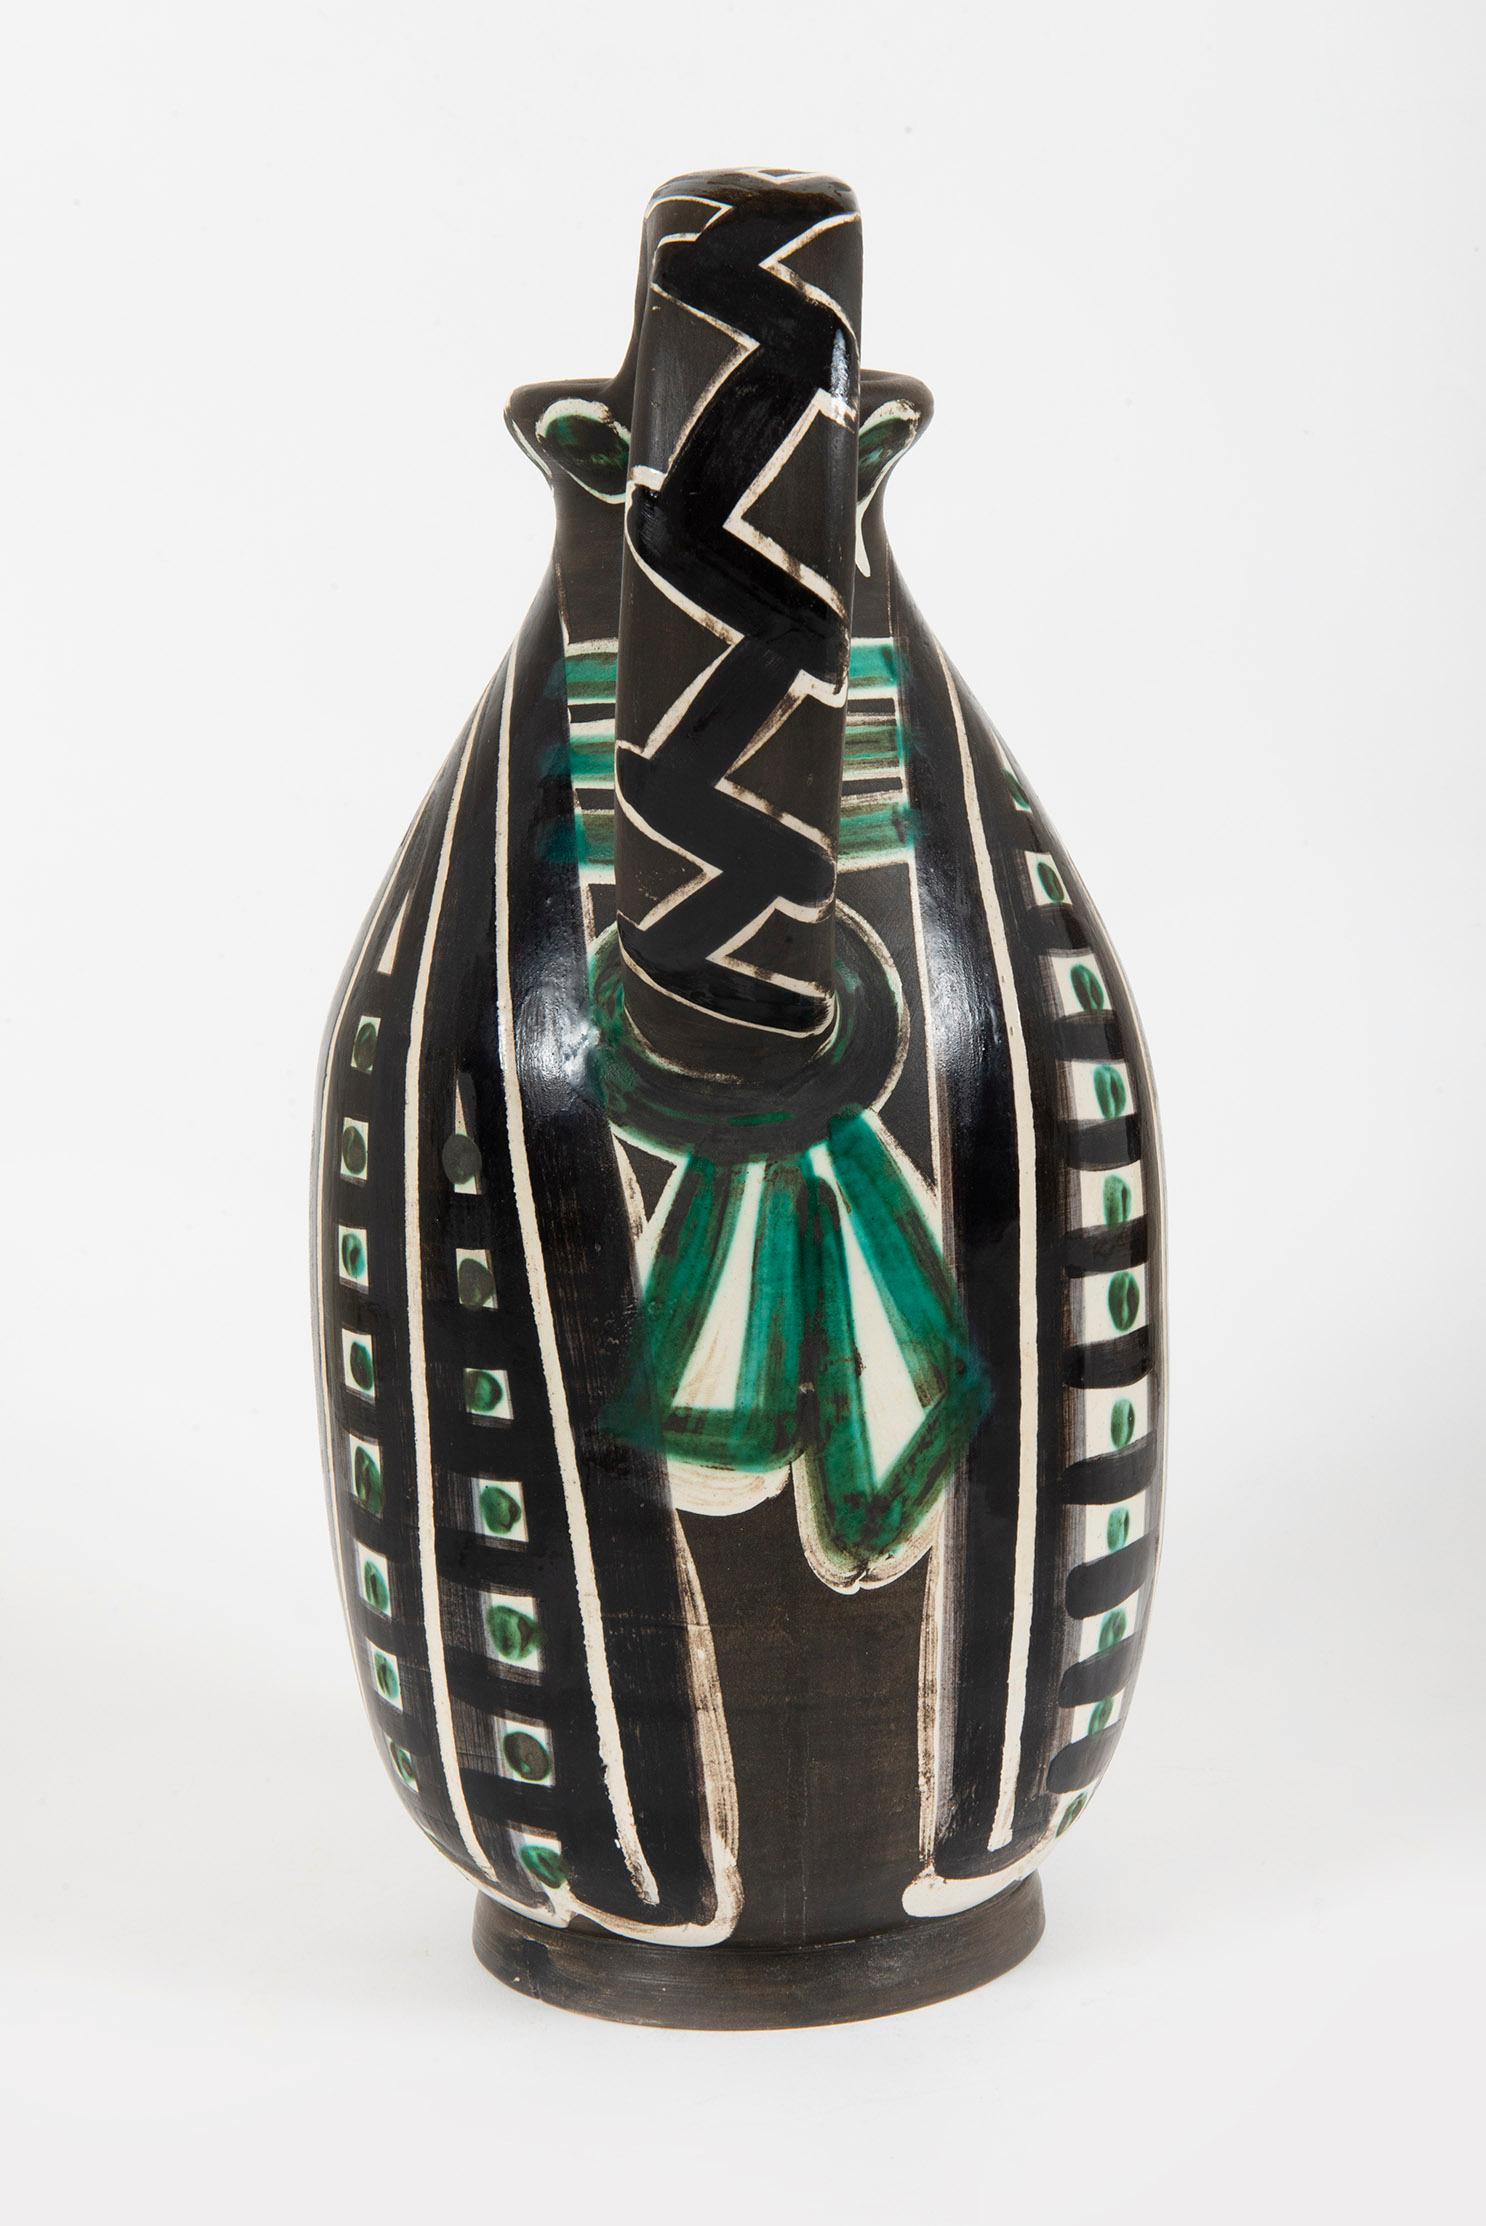 Femme du barbu, Pablo Picasso, Ceramic, Terracotta, 1950's, Postwar, Sculpture
Ed. 500 pcs
White earthenware clay, decoration in engobes, knife engraved under partial brushed glaze, beige, black, green and grey patina.
Stamped and signed underneath